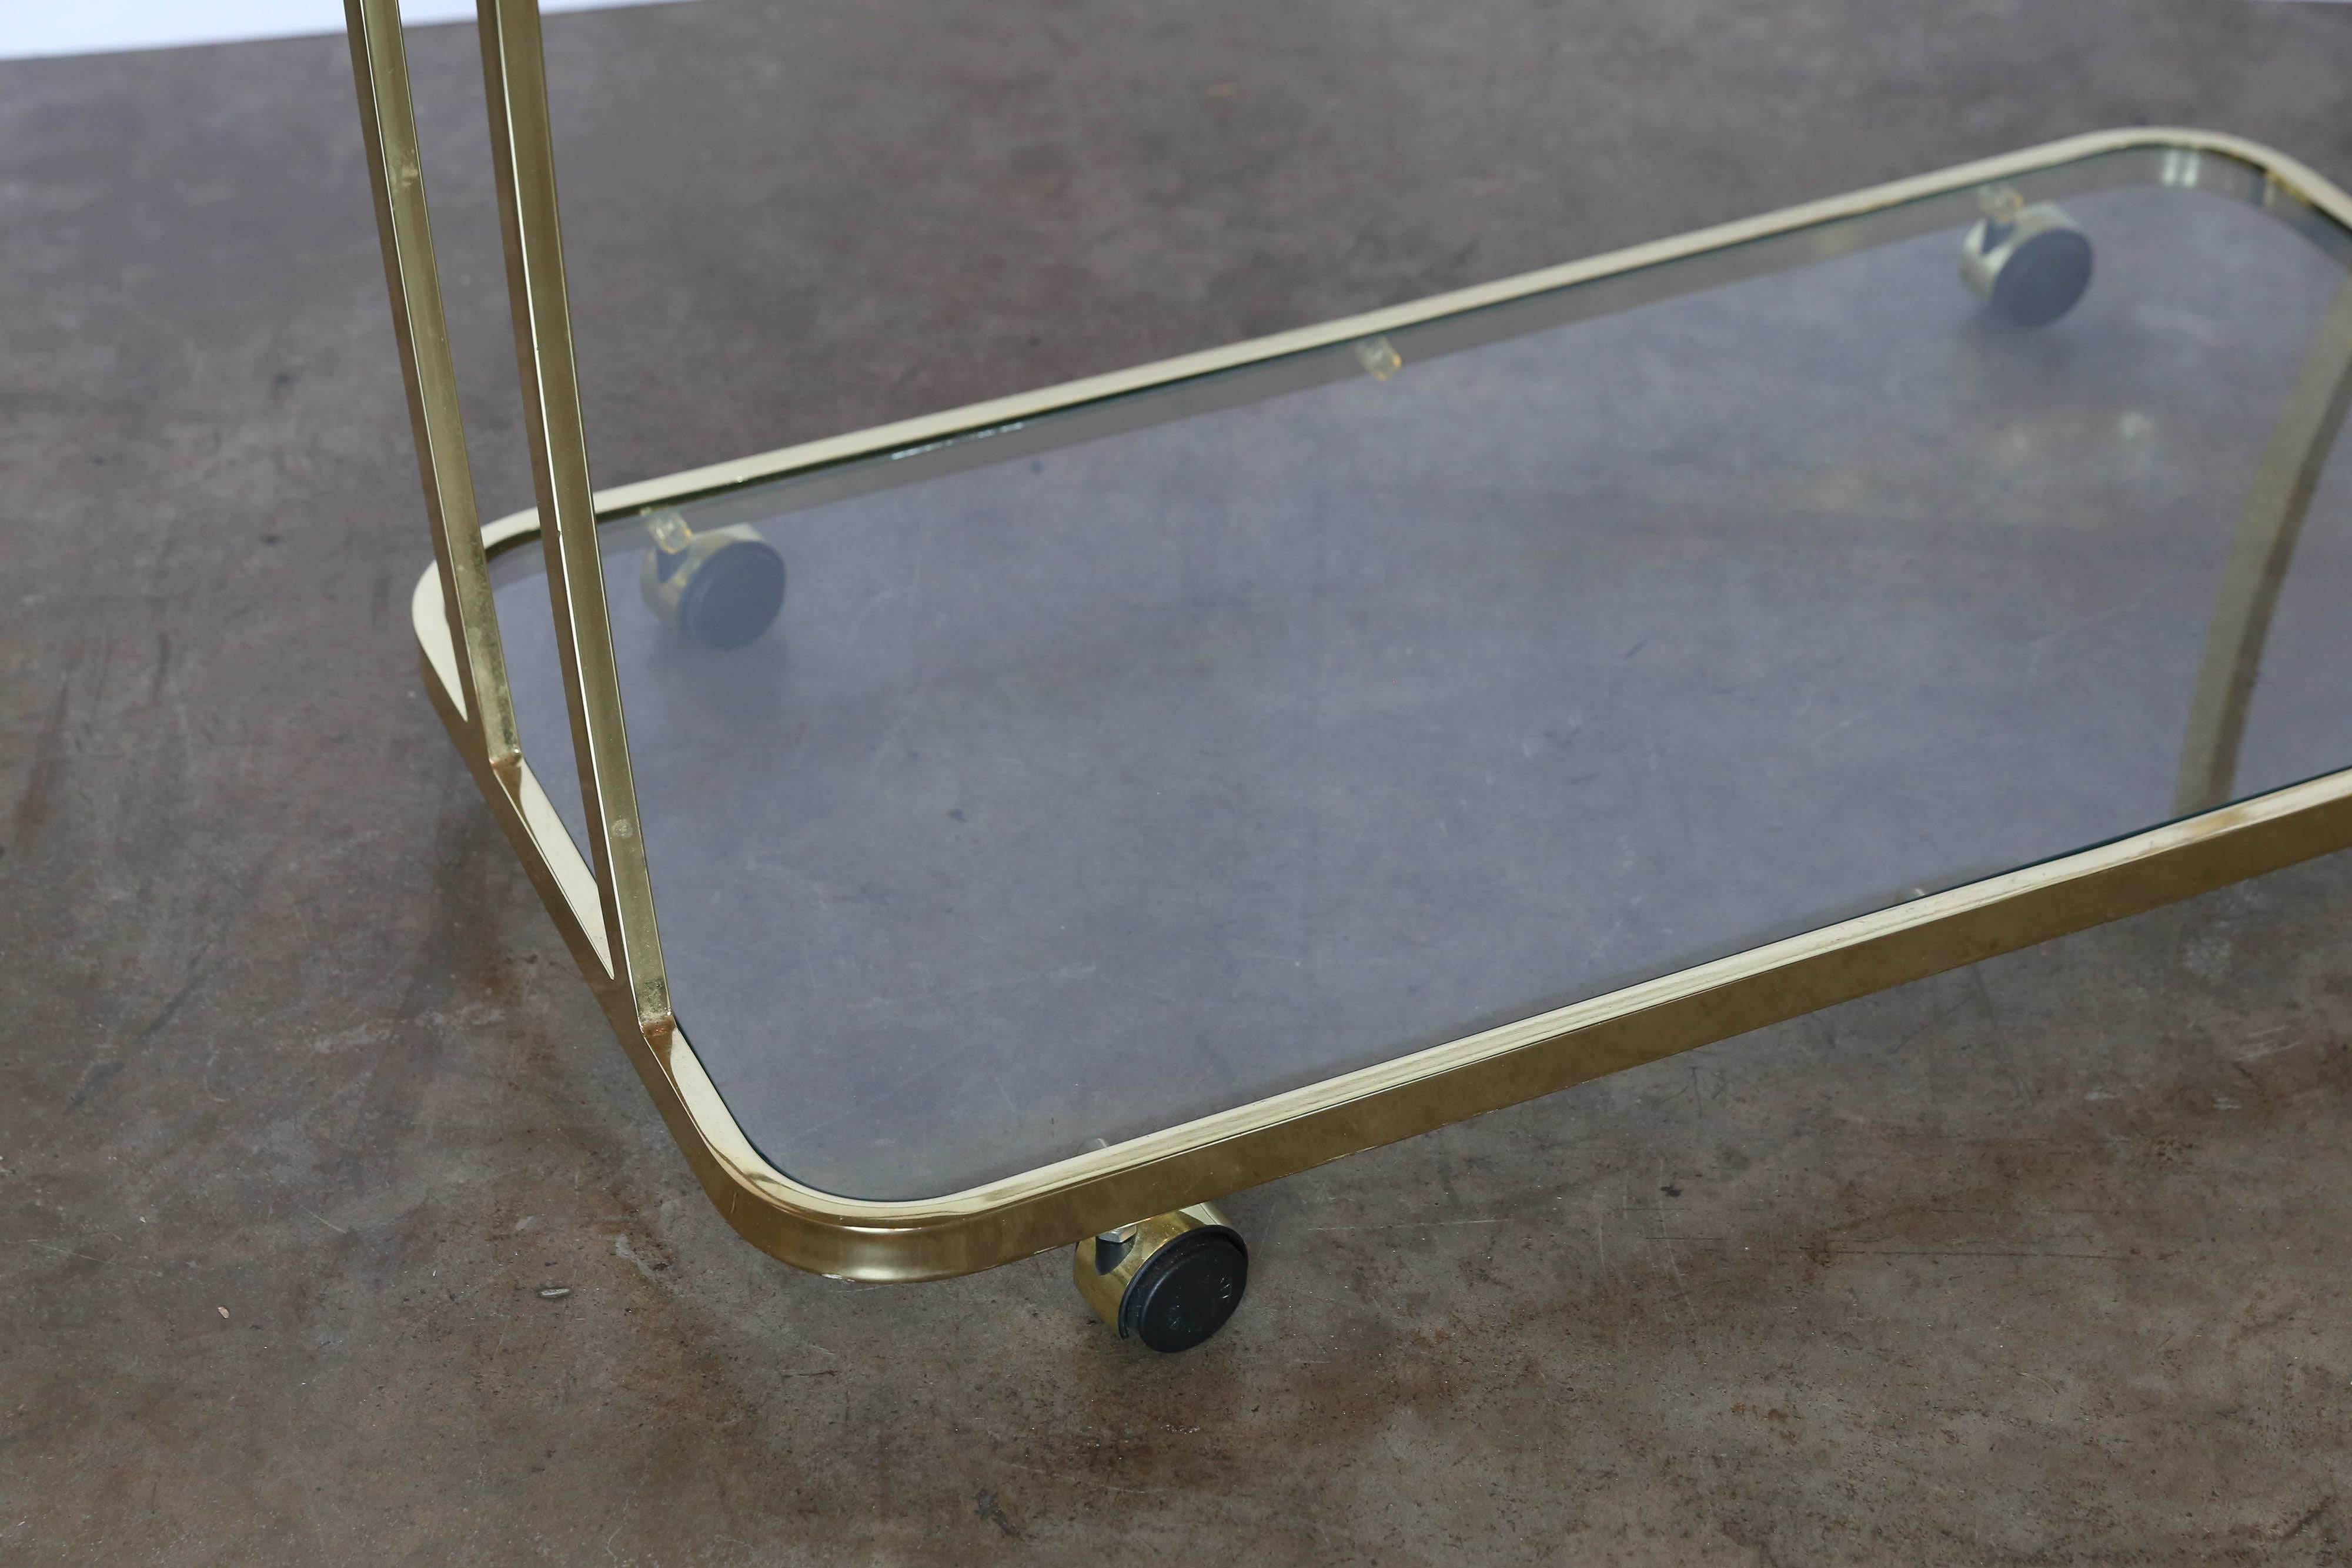 Offered is an 80s high glam shiny brass and glass three tier bar / drinks / tea cart / server attributed to Design Institute America. Sure to make entertaining more fun and memorable.